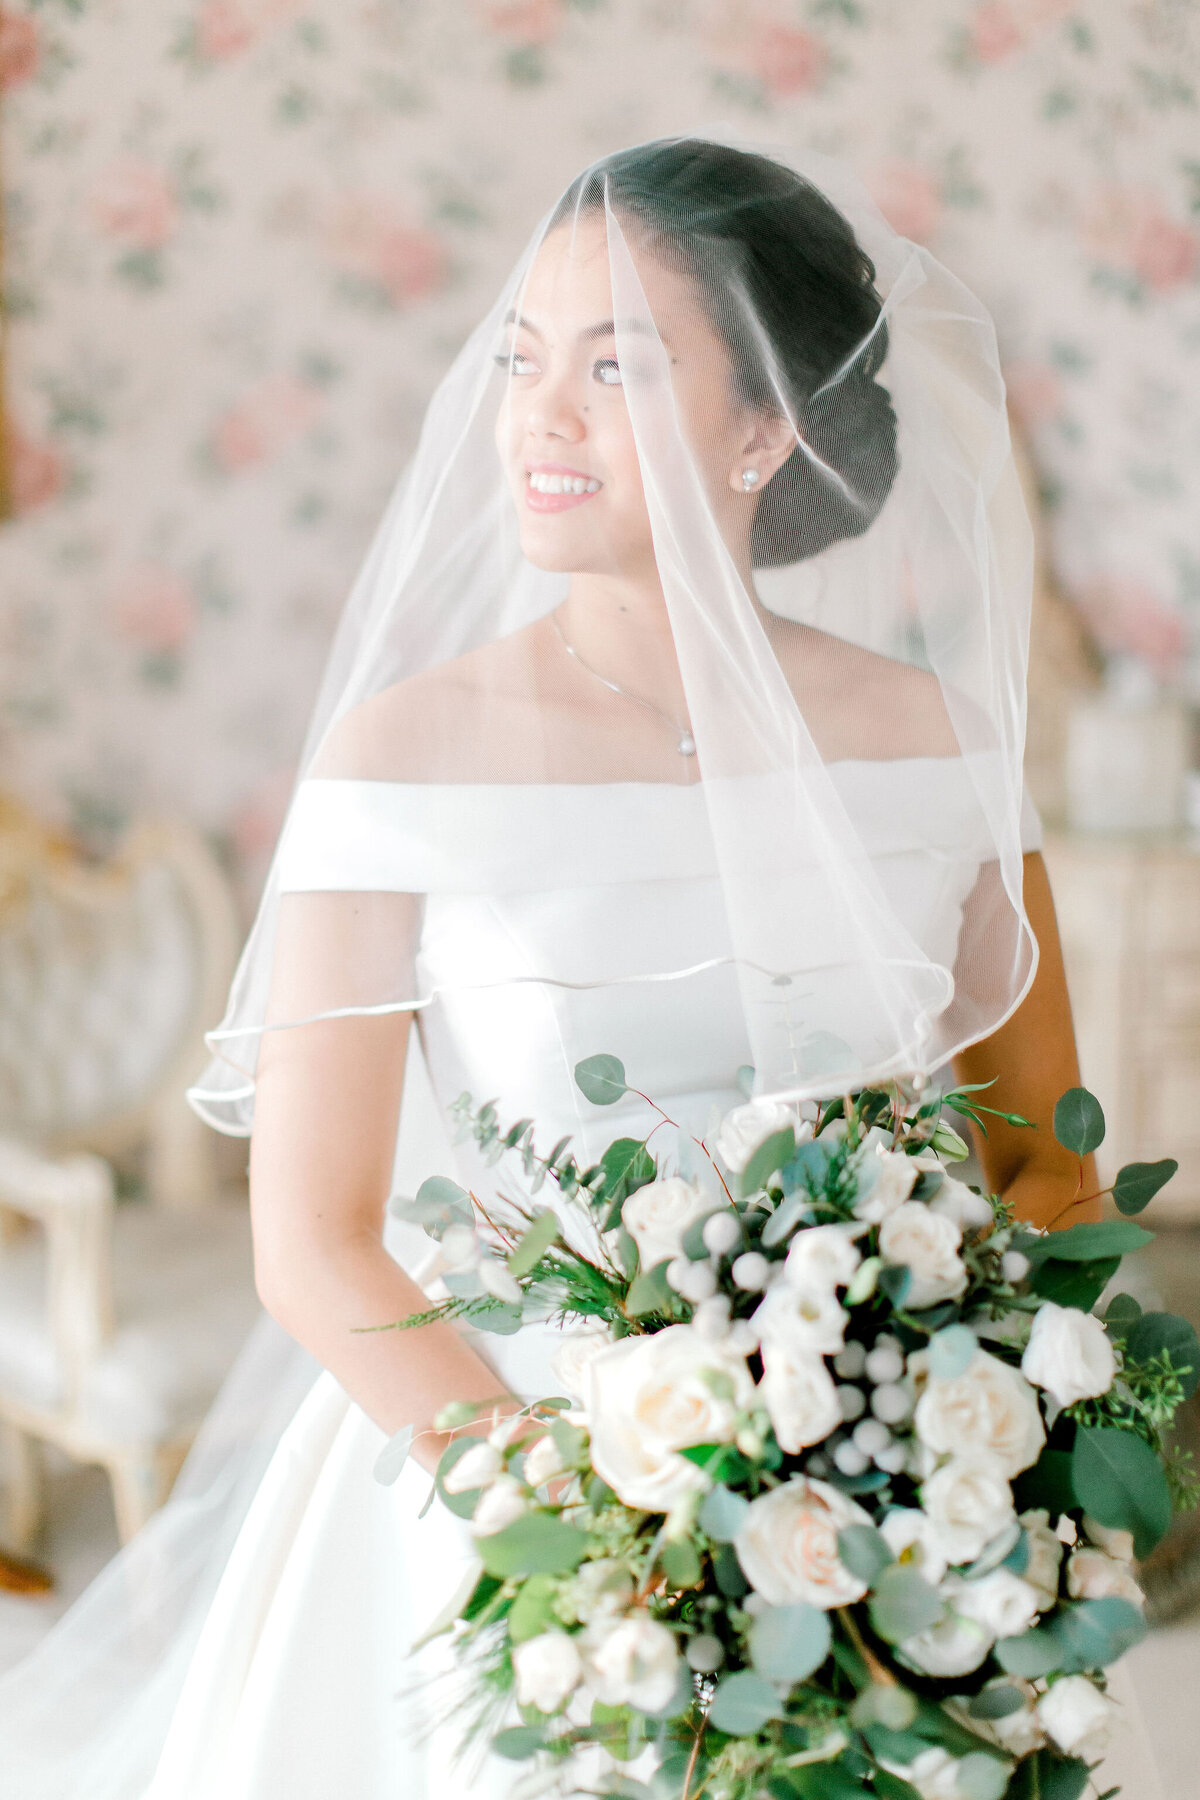 This image likely portrays the bride in a fine art photography style, emphasizing the artistic and elegant aspects of bridal photography